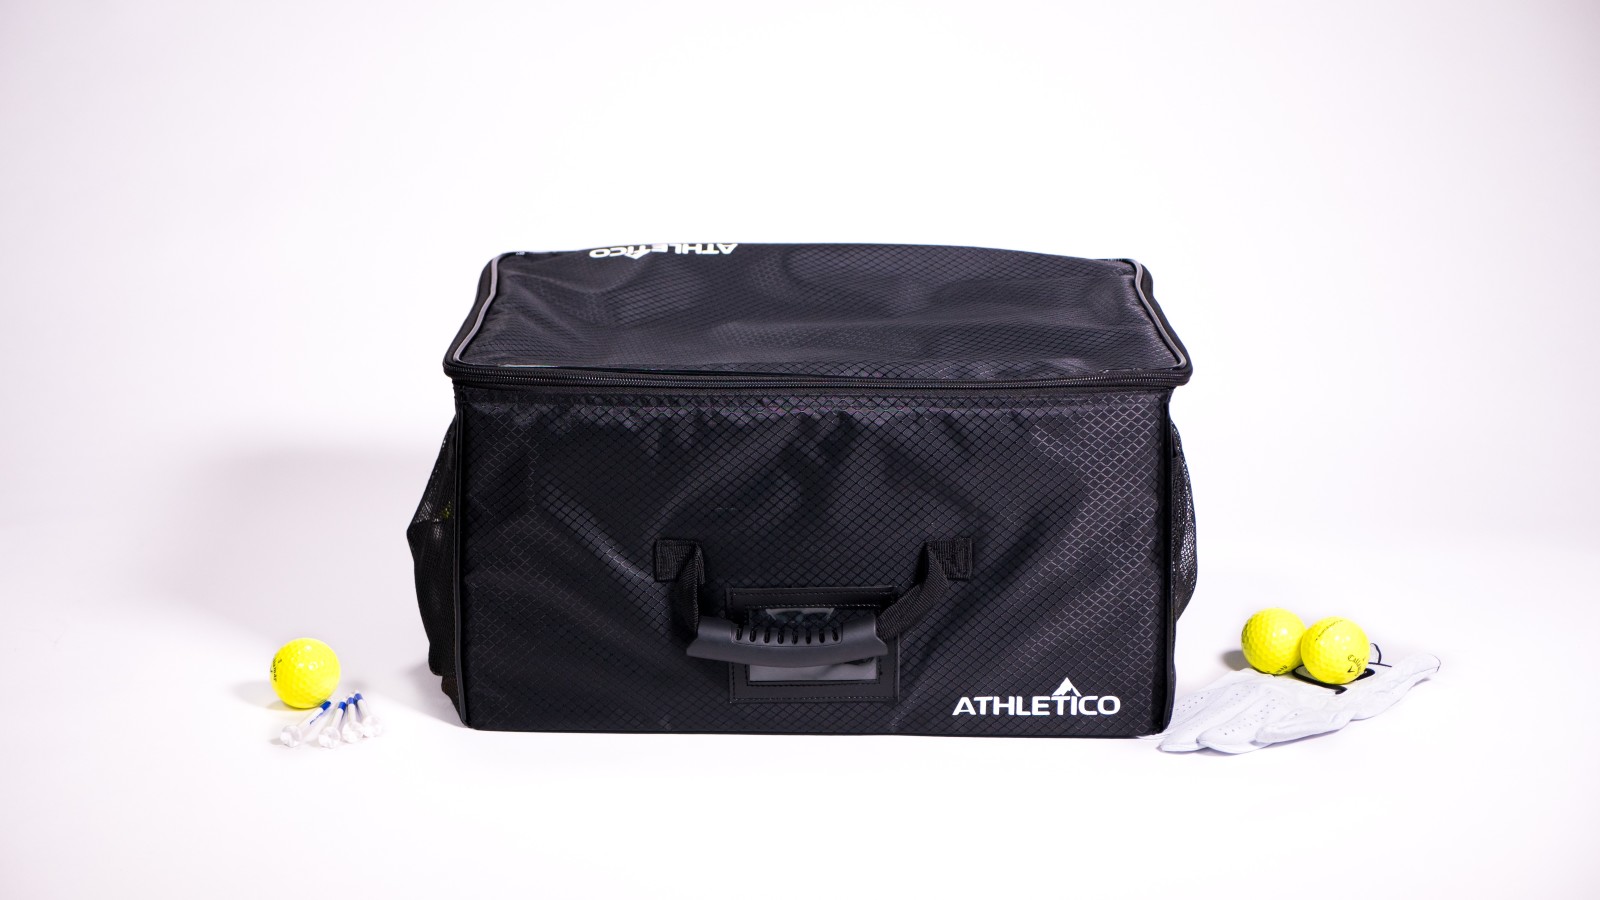 The Athletico Golf Trunk Organizer is a One-Stop Shop to Store